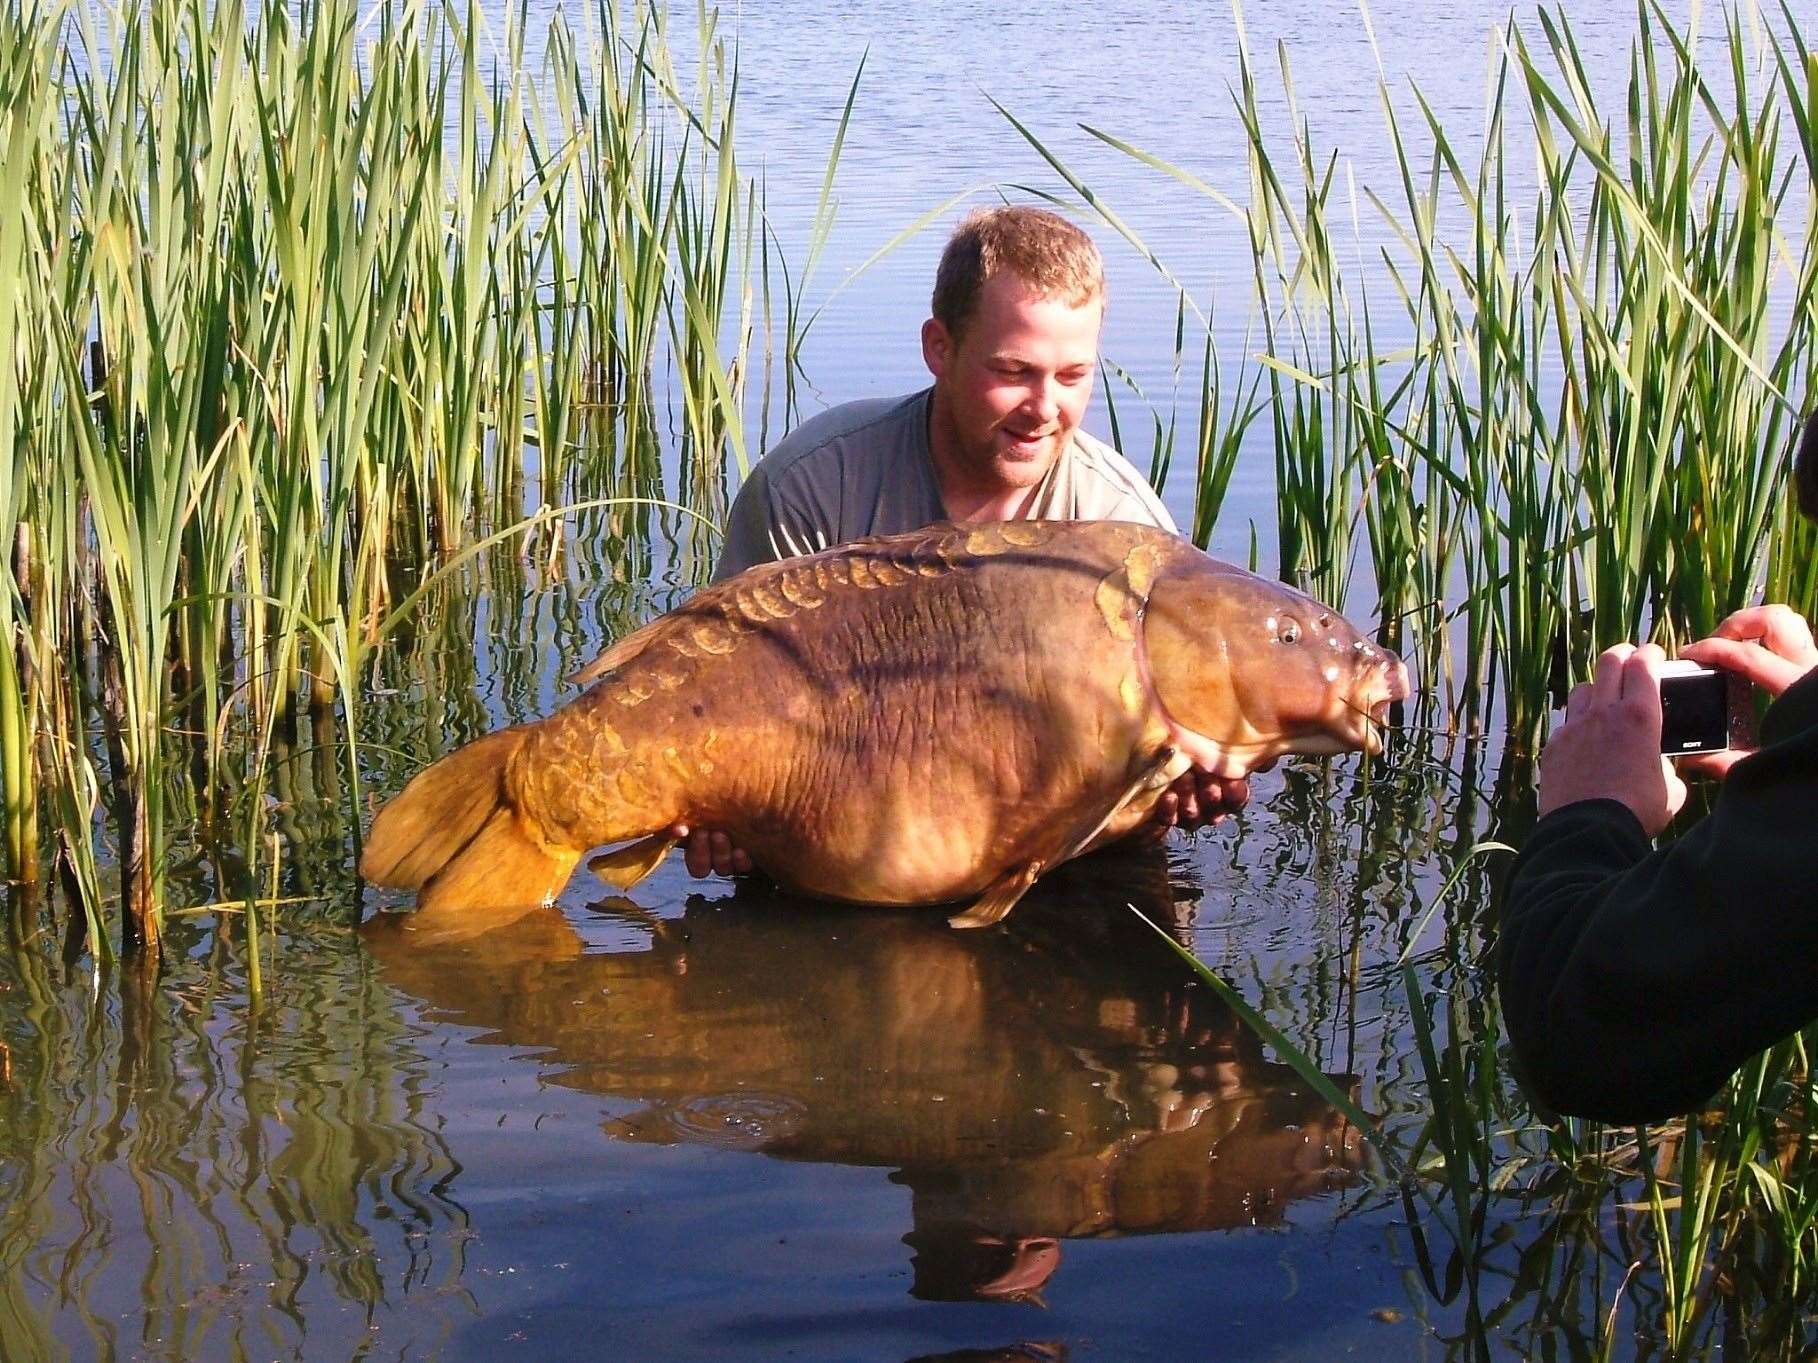 Two Tone was a legendary mirror carp that was a lifetime goal for some anglers